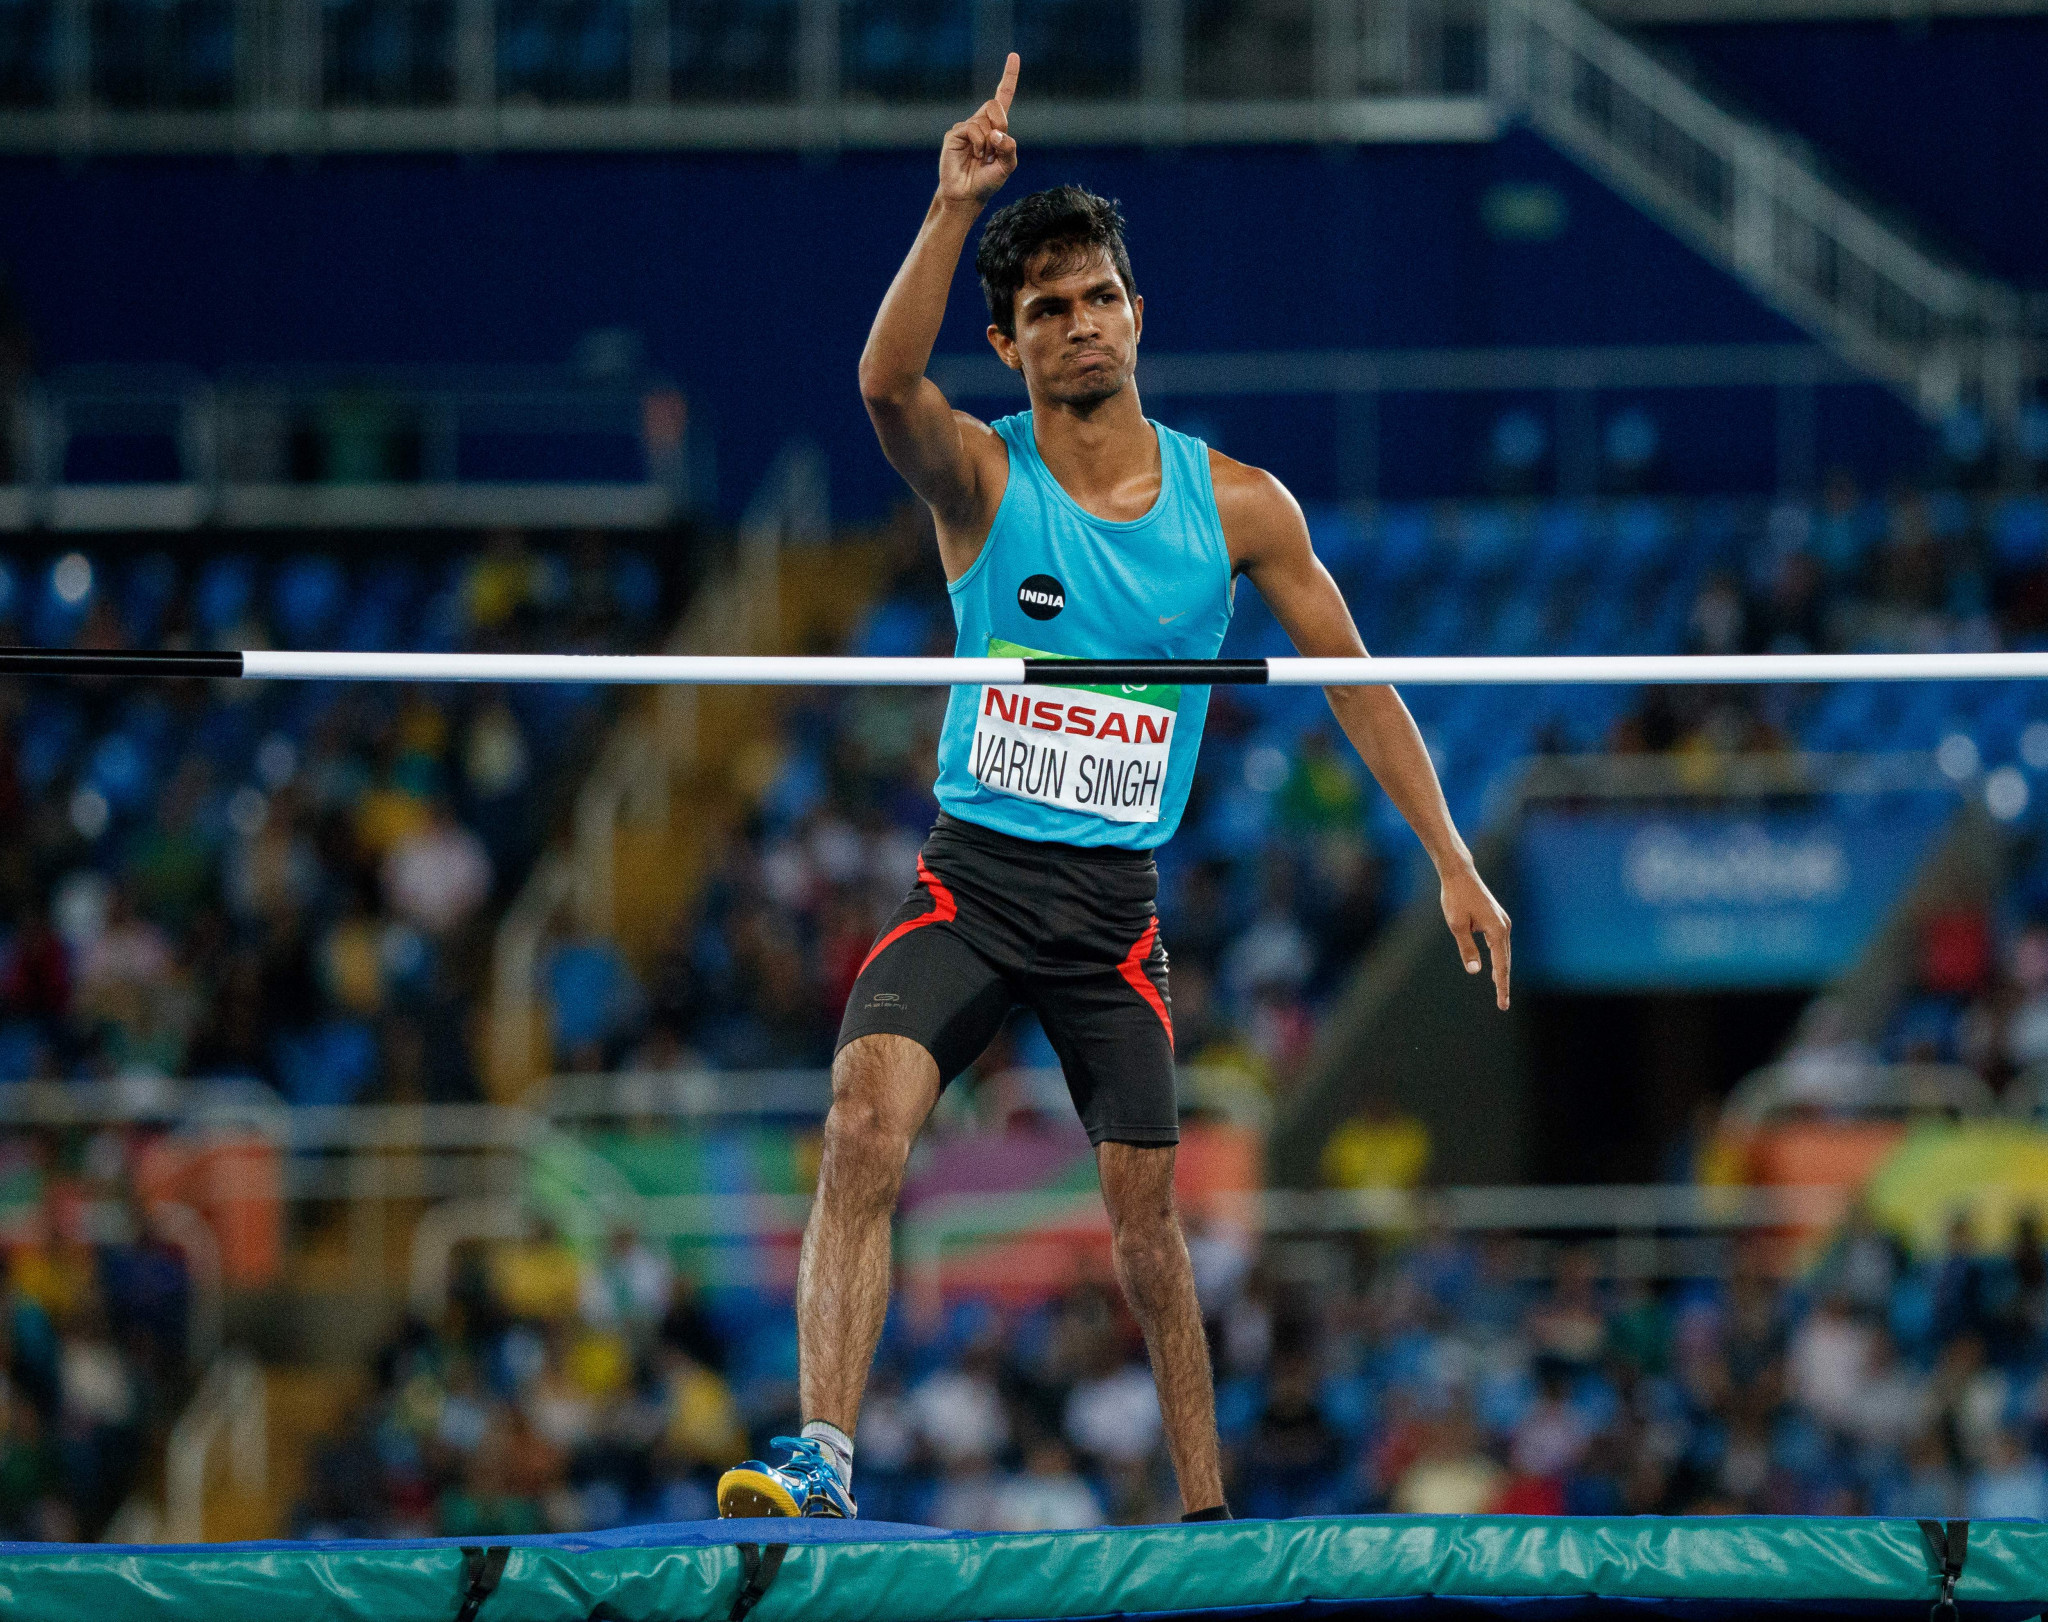 India will be looking to better its haul of four Para athletics medals achieved at Rio 2016 ©Getty Images